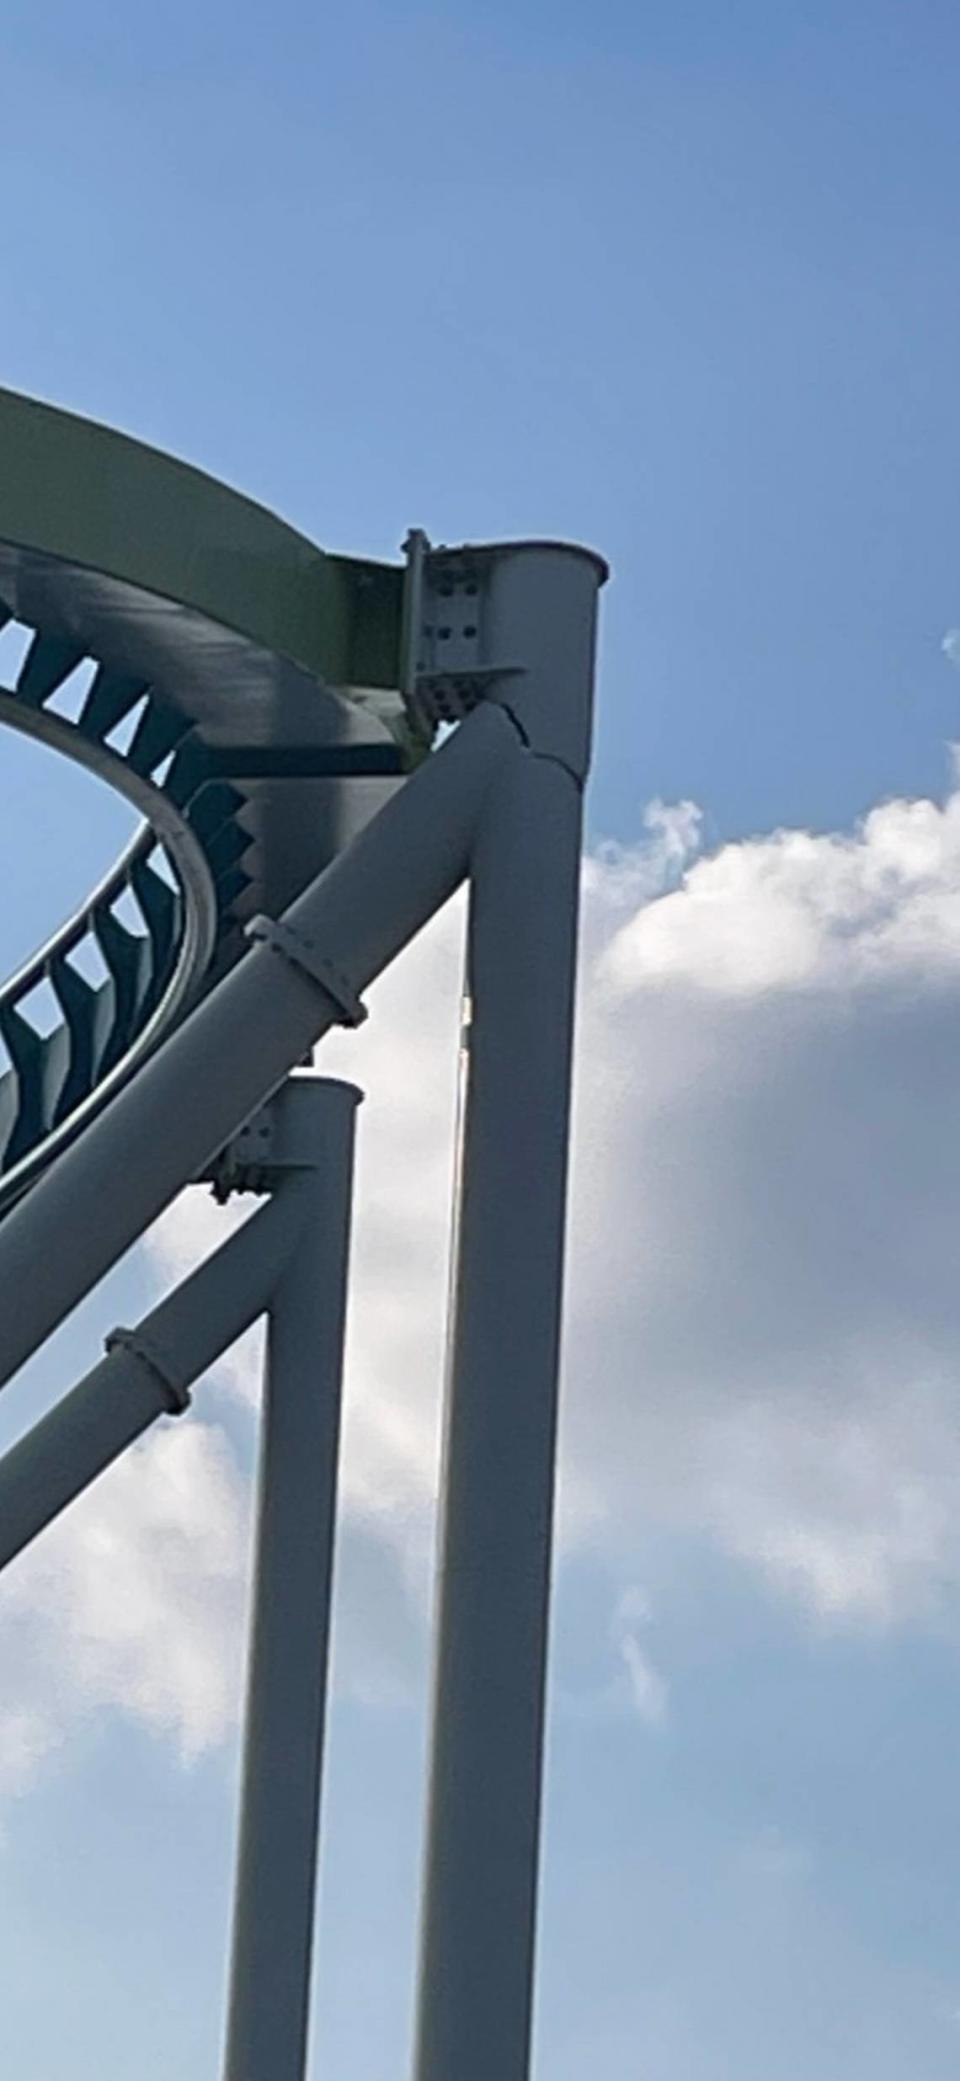 A crack formed in one of the support pillars for the Fury 325 roller coaster at Carowinds in North Carolina. The ride has been closed pending repairs.